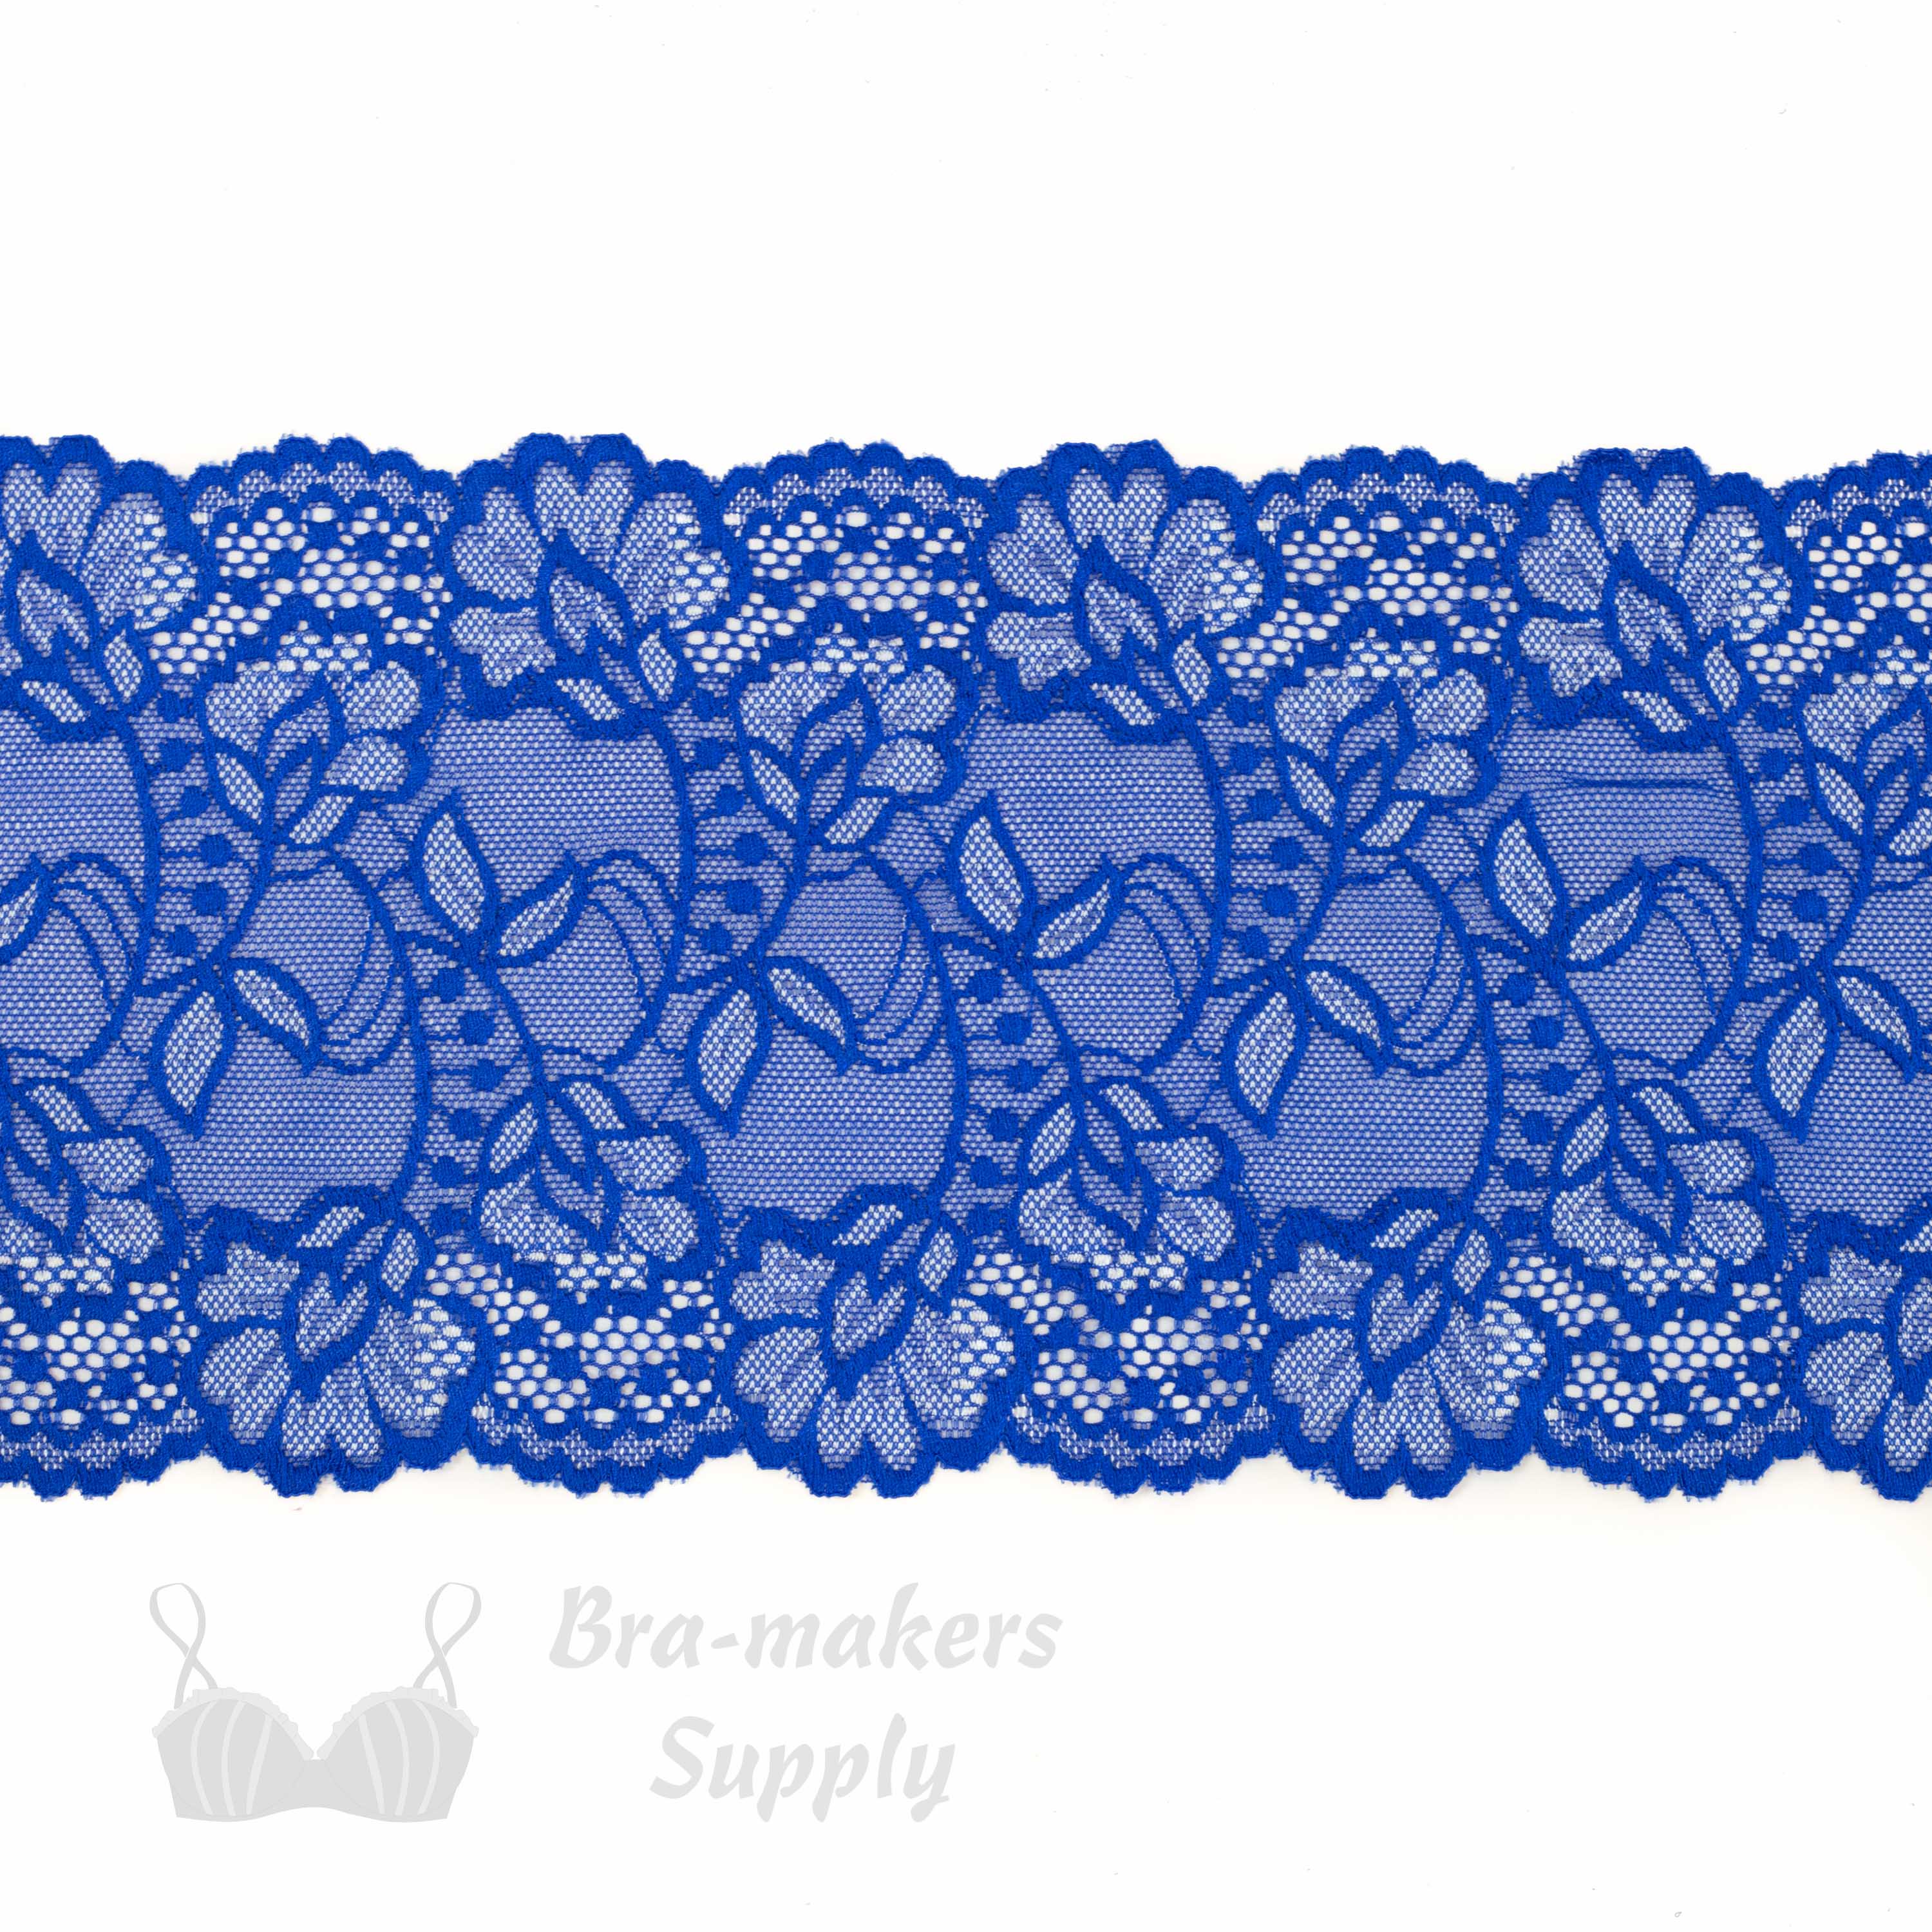 Six Inch White Royal Blue Floral Stretch Lace - Bra-Makers Supply